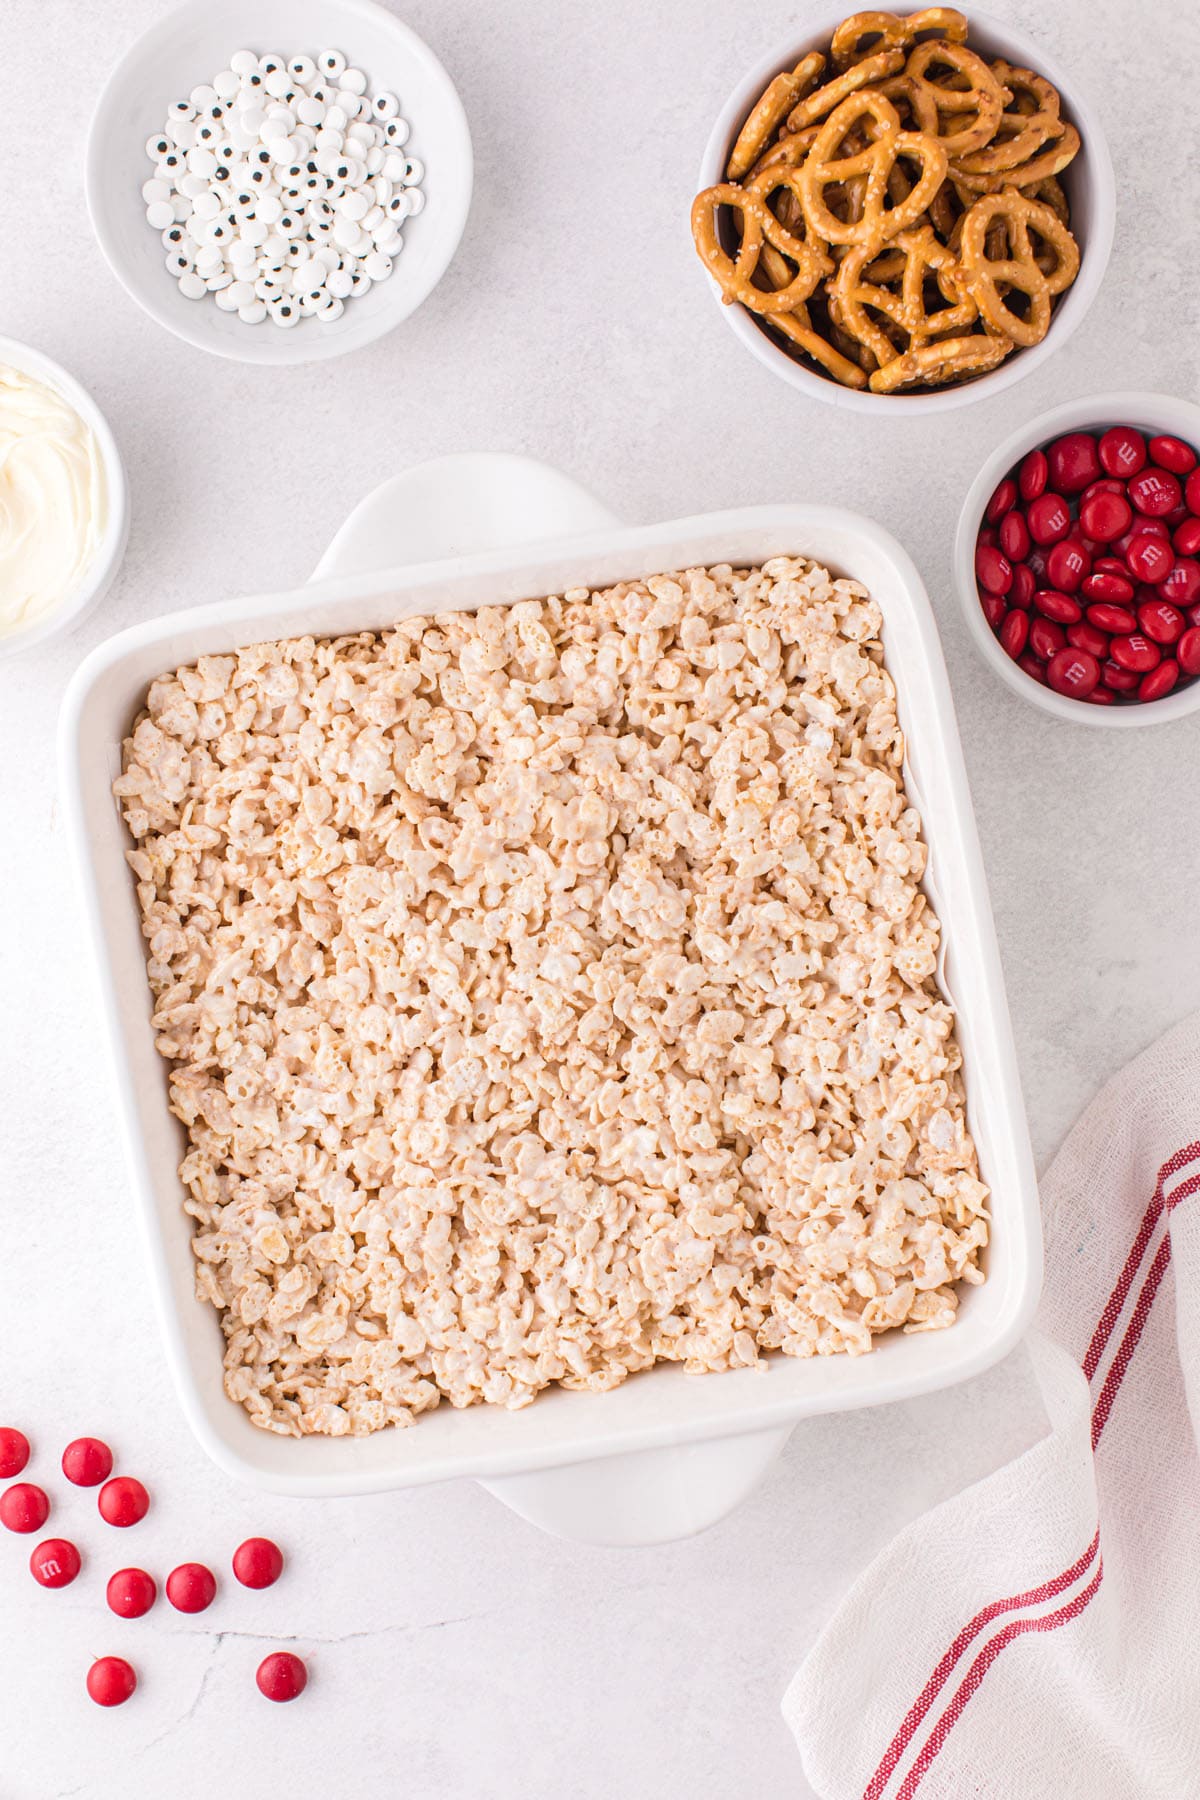 Spread the Rice Krispies treats into the bottom of the baking pan